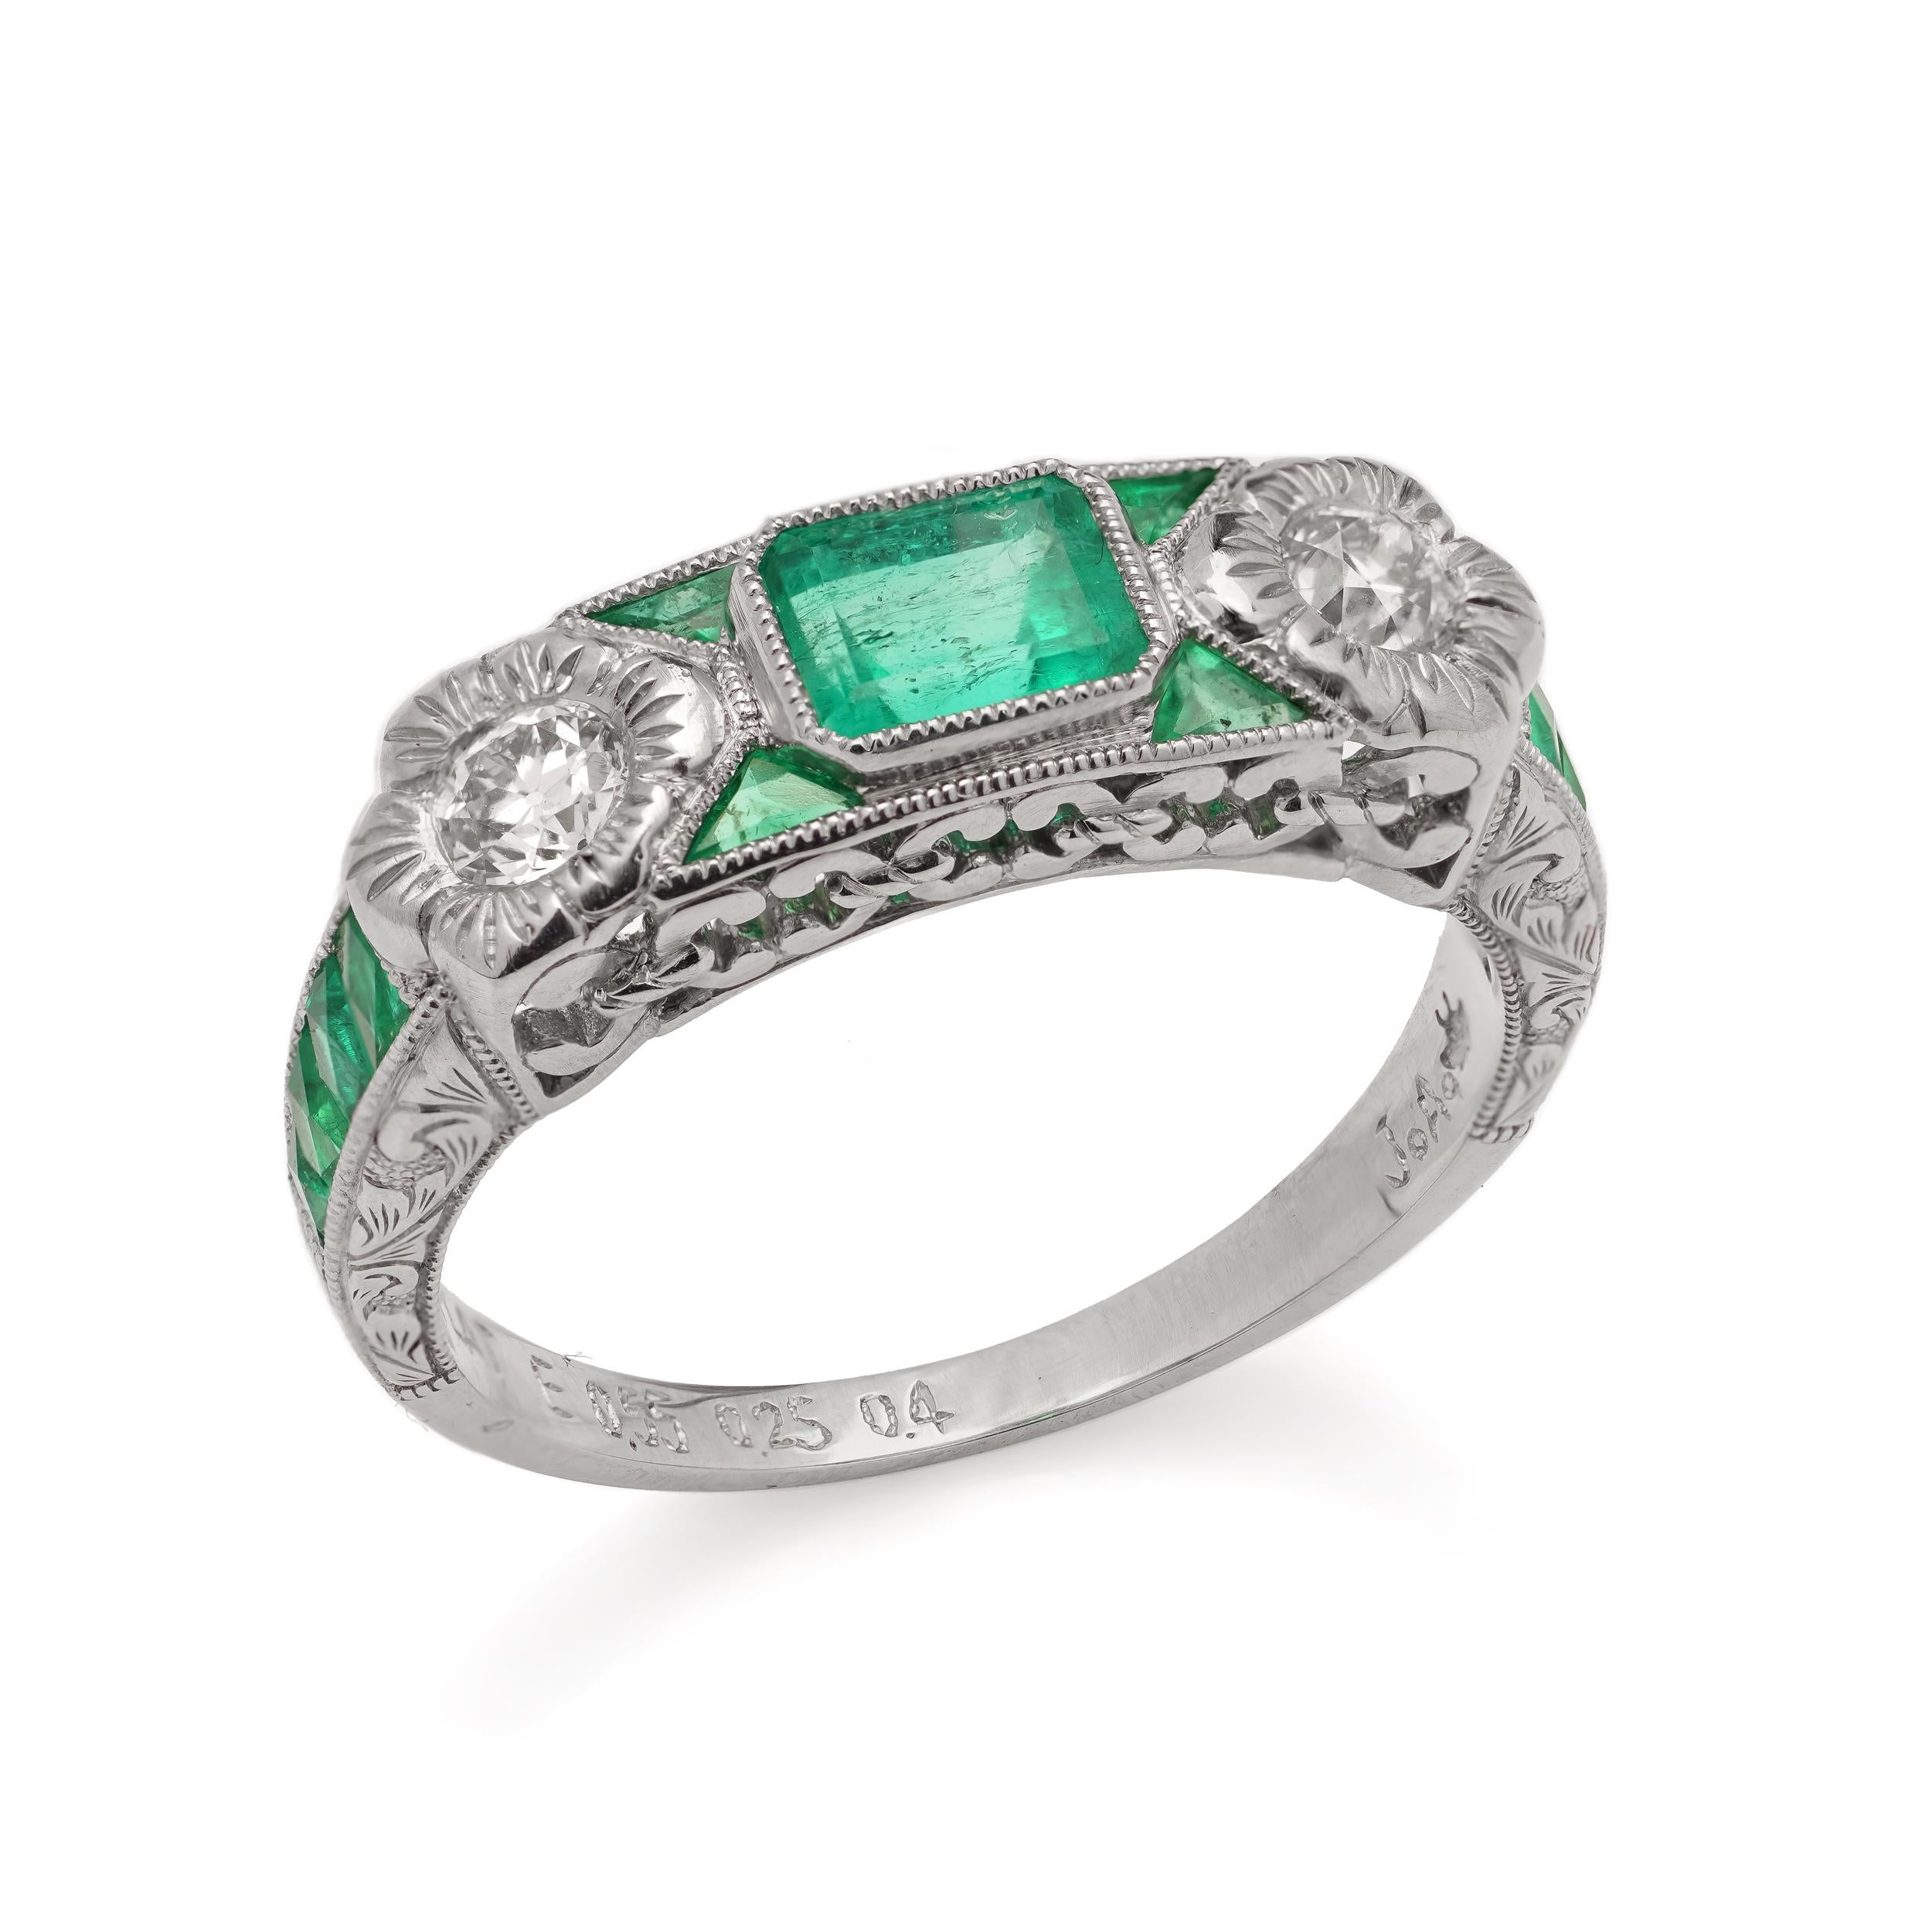 Platinum 0.55 carats of Emerald - cut Emerald ring, set with two round brilliant diamonds and baguette and triangle - cut emeralds.

Made in After 2000
Maker: JoAq 
X-Ray tested positive for .850 platinum purity. 

Dimensions - 
Finger Size (UK) = M